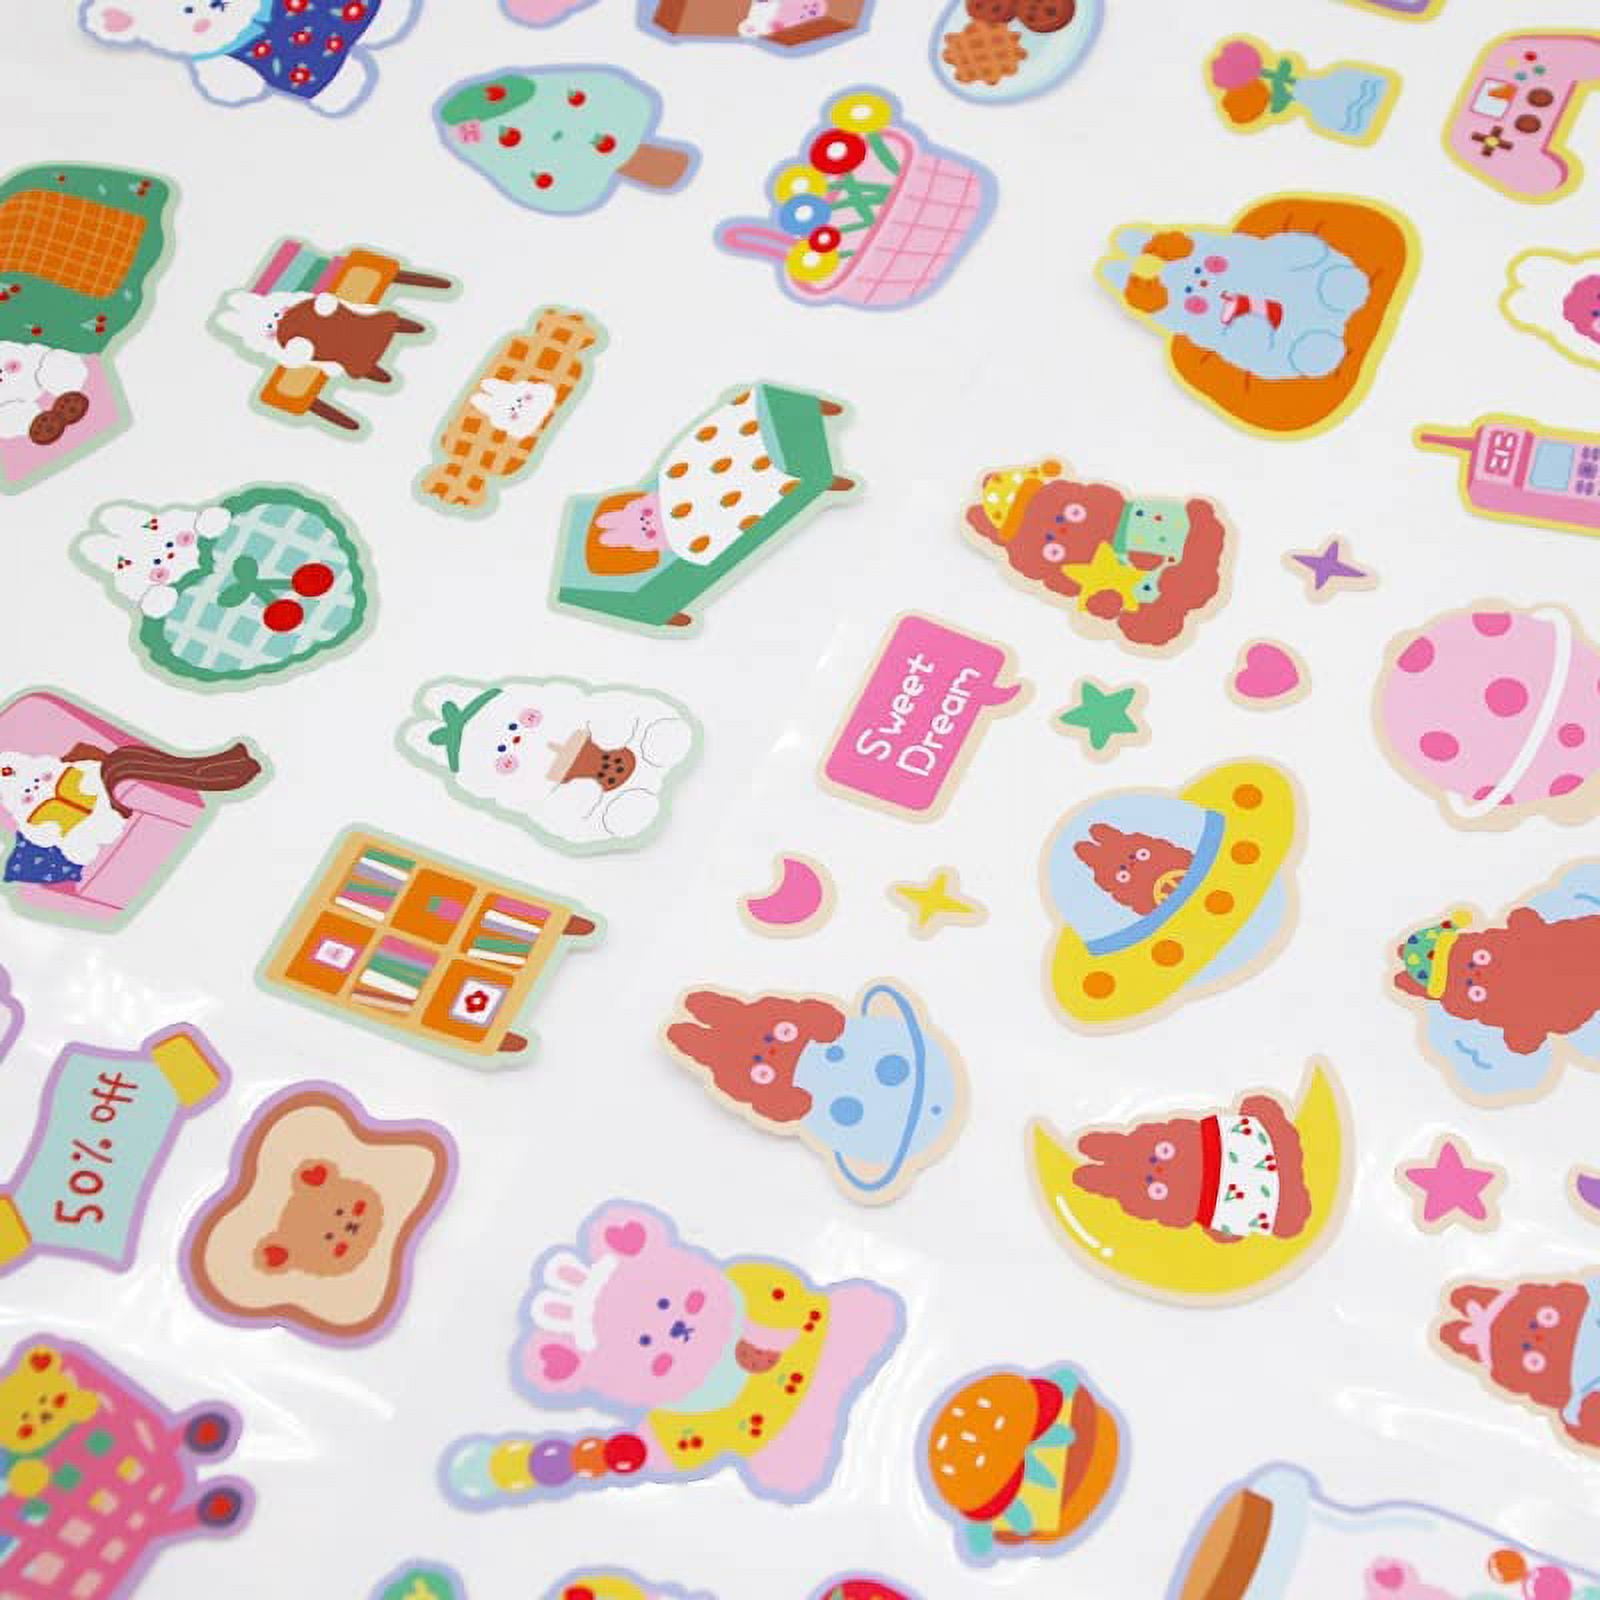 10 DIY Cute Sticker Ideas for Home Craft Lovers - Drizy Studio